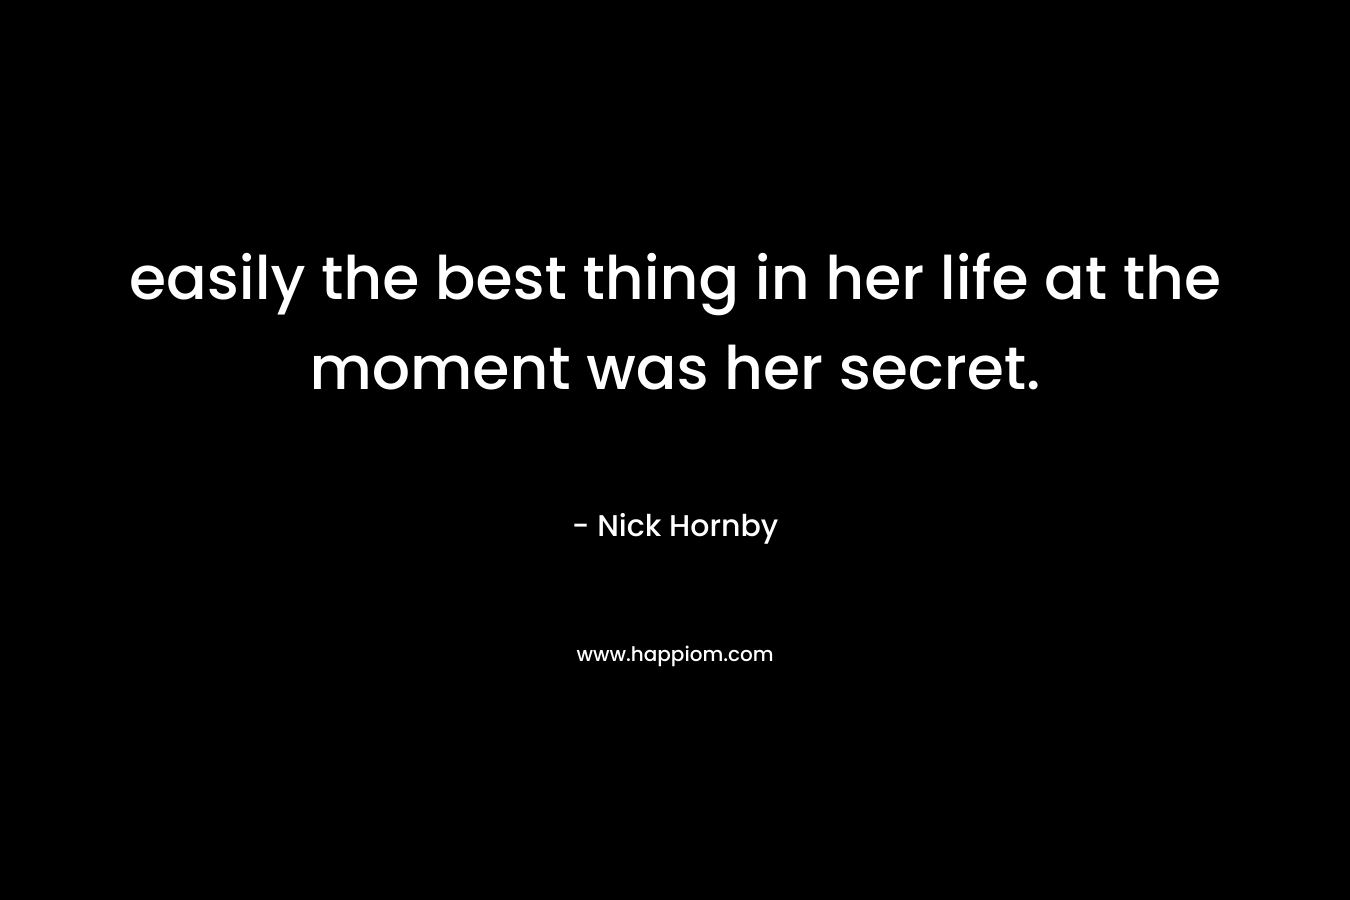 easily the best thing in her life at the moment was her secret. – Nick Hornby